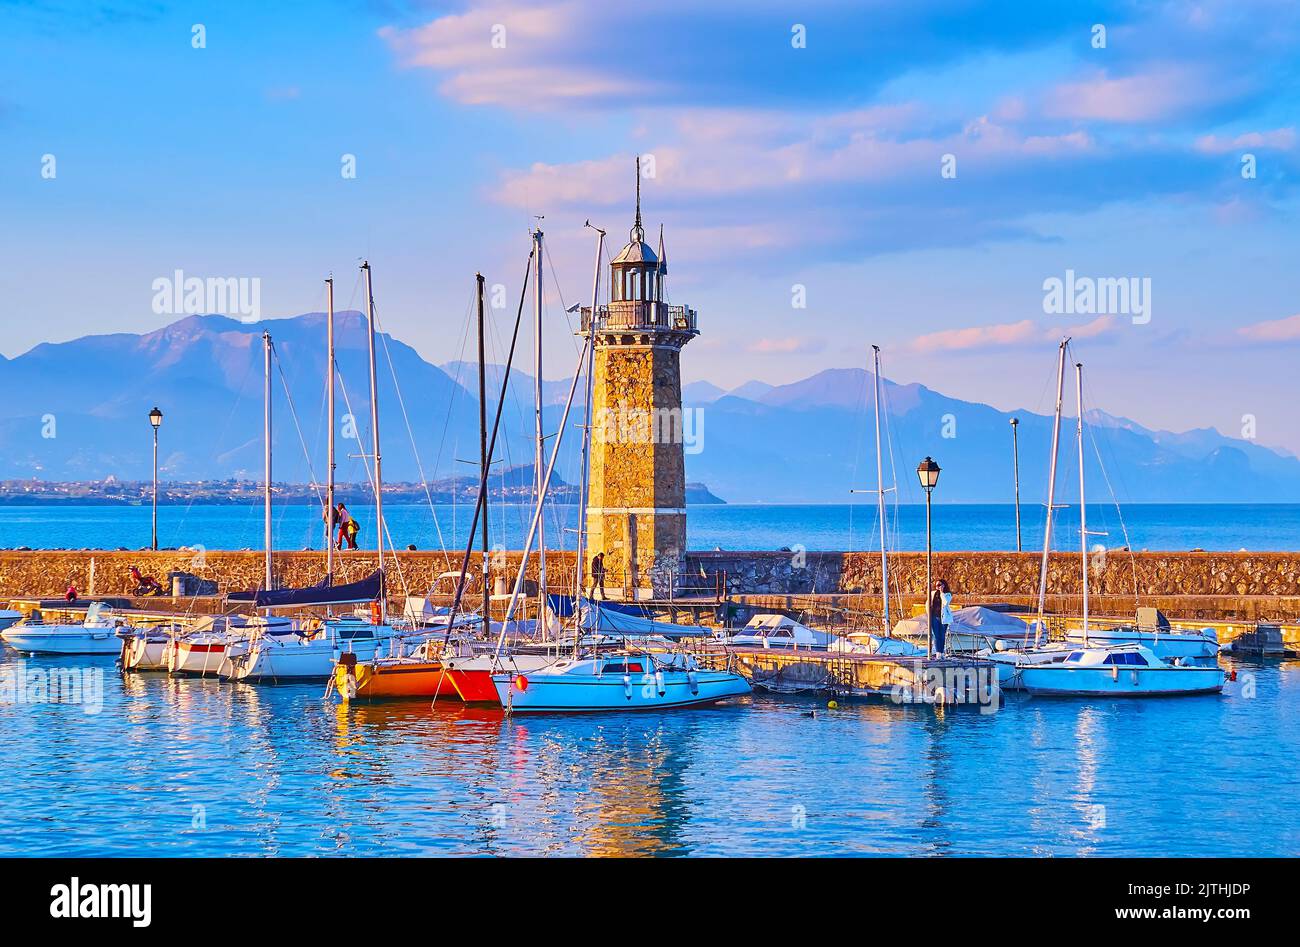 The foggy evening on Lake Garda with yachts, Faro lighthouse and the silhouettes of Garda Prealps in background, Desenzano del Garda, Lombardy, Italy Stock Photo